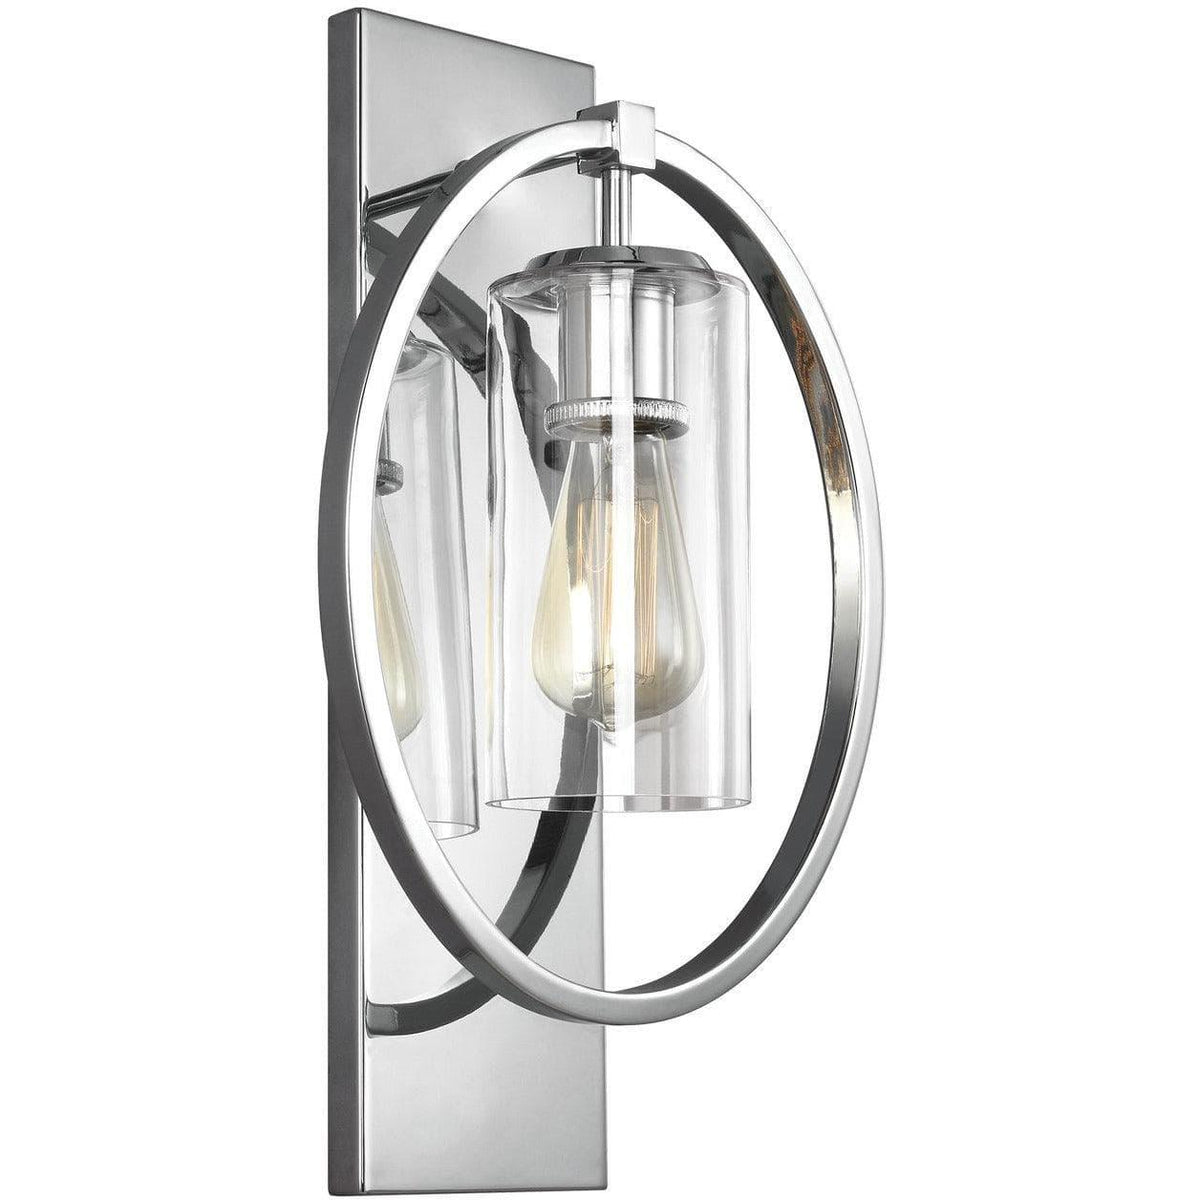 Generation Lighting - Marlena Wall Sconce - WB1846CH | Montreal Lighting & Hardware